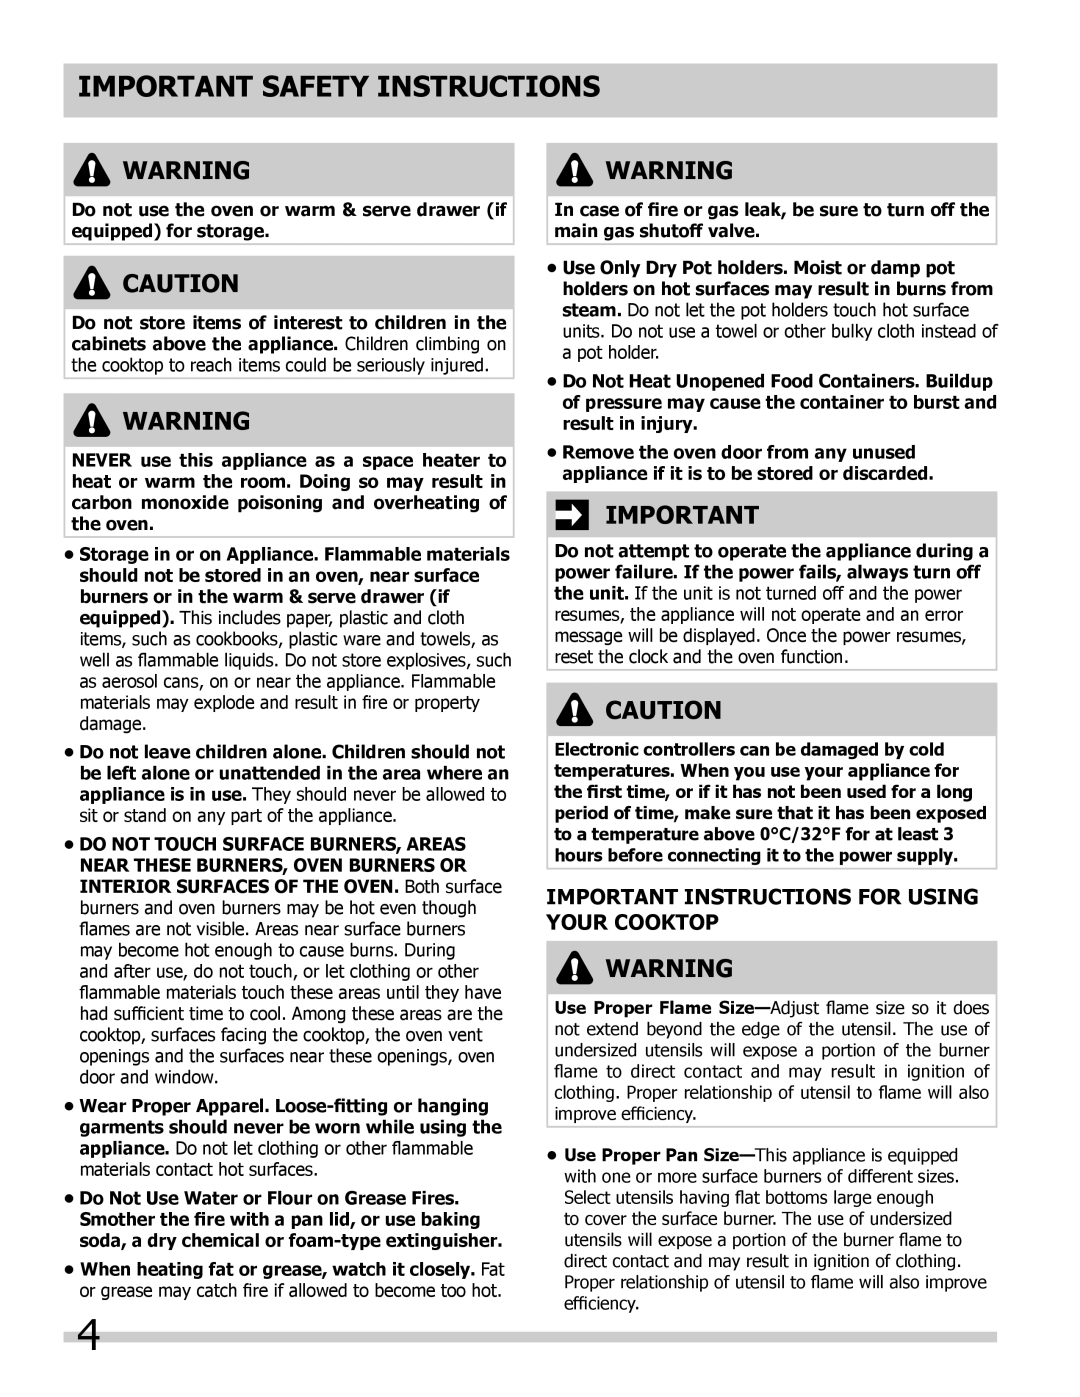 Frigidaire FGDS3065KB, FGDS3065KW, FGDS3065KF Important Instructions For Using Your Cooktop, Important Safety Instructions 